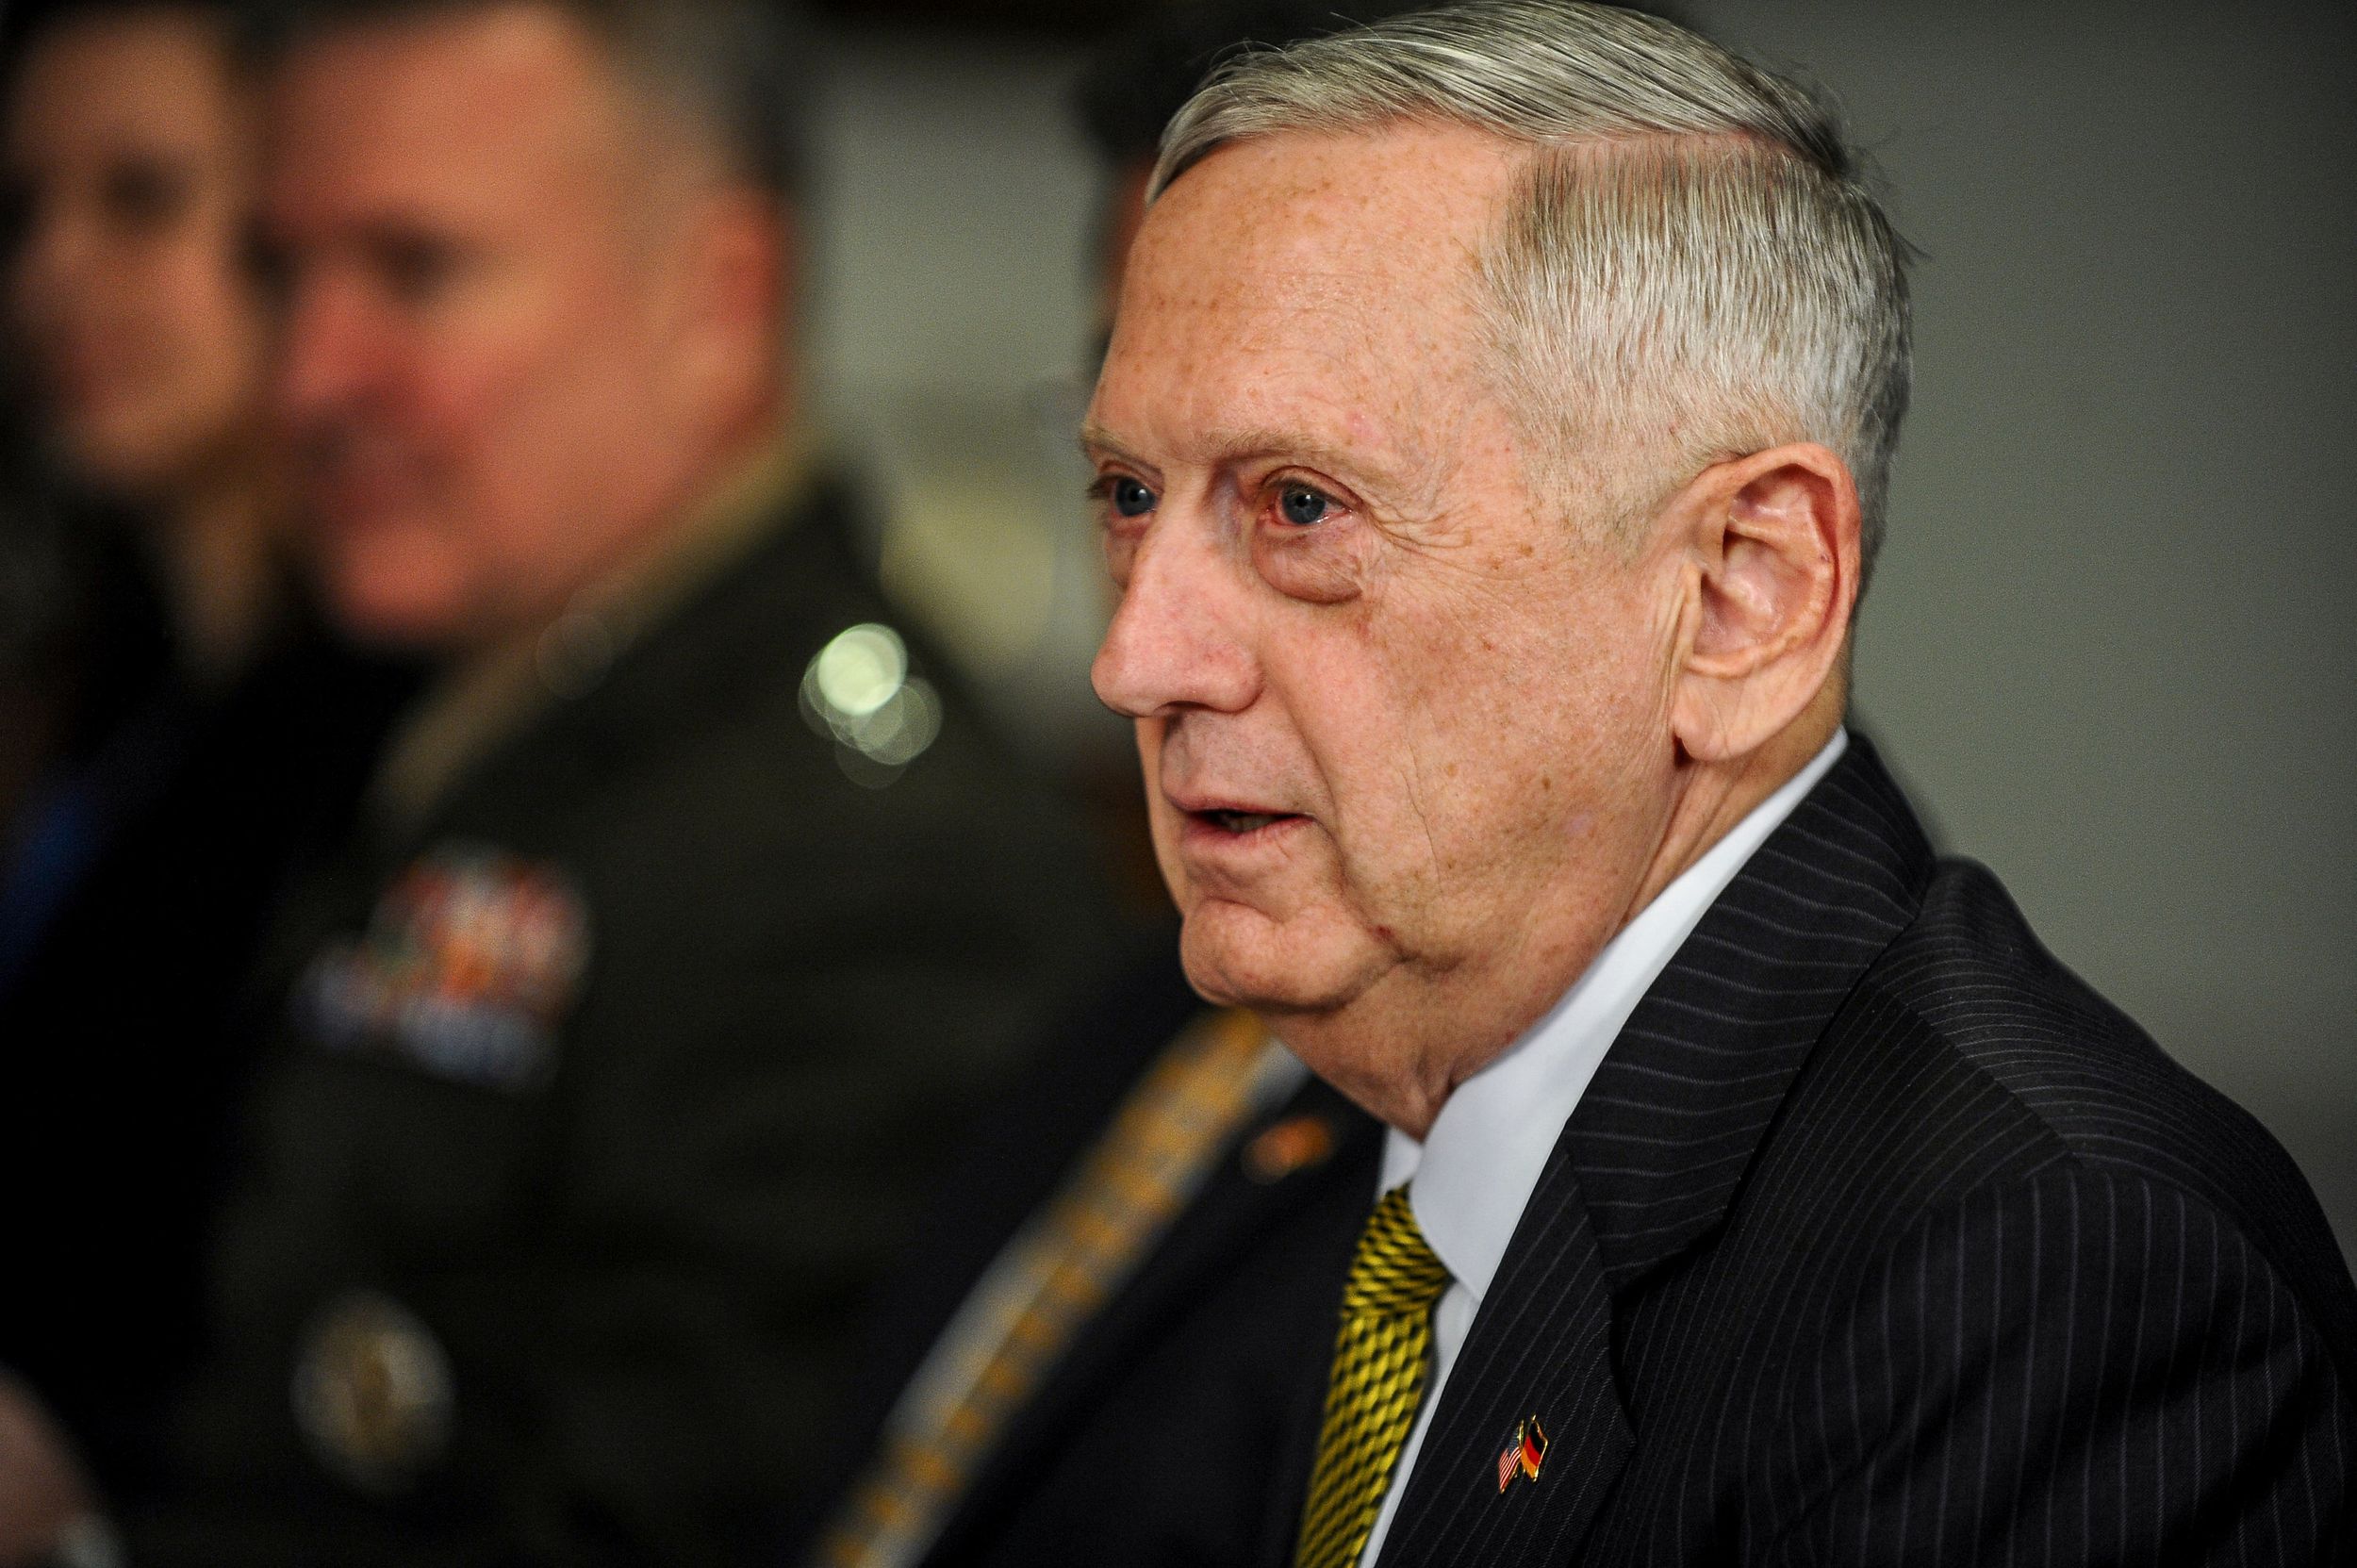 The Last Word From James Mattis